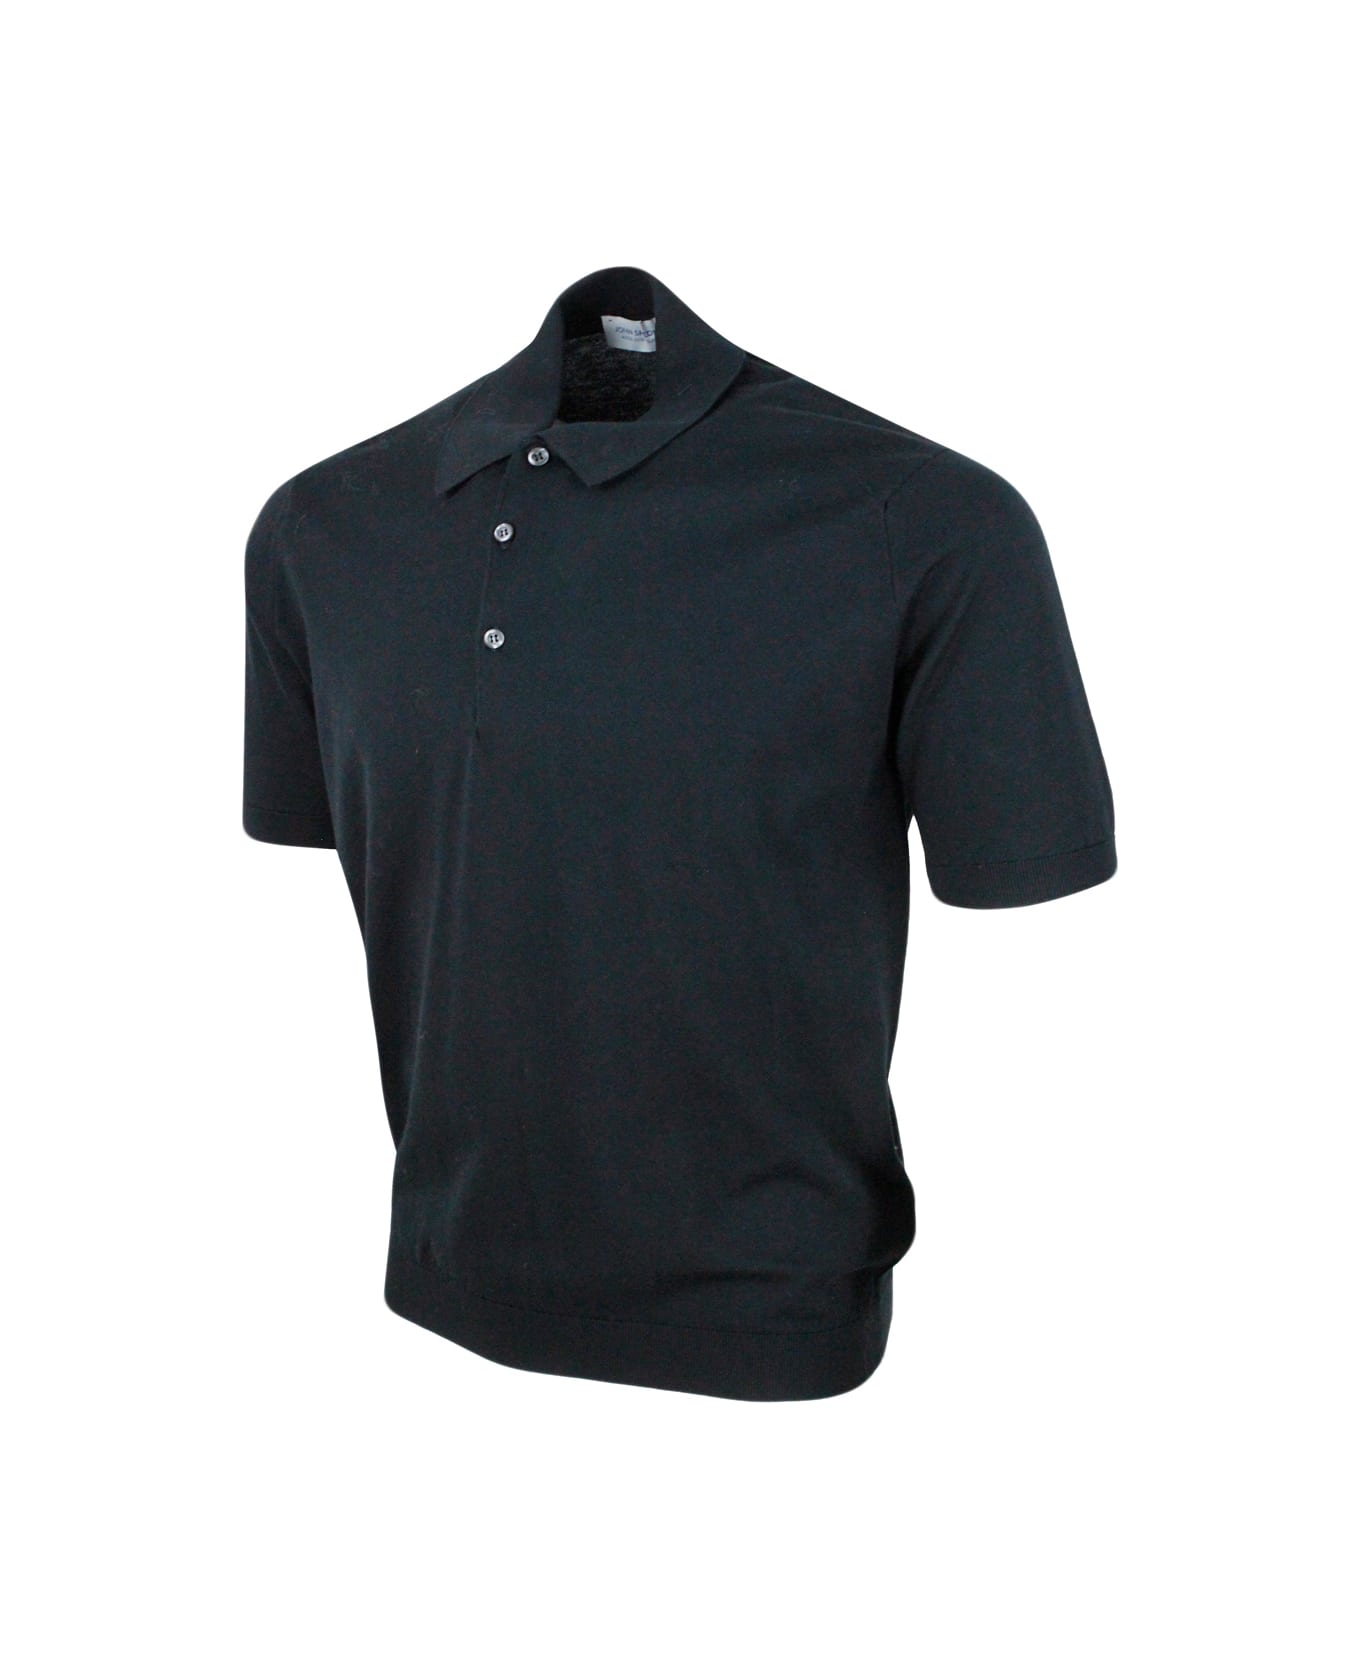 John Smedley Short-sleeved Polo Shirt In Extra-fine Cotton Thread With Three Buttons - Black